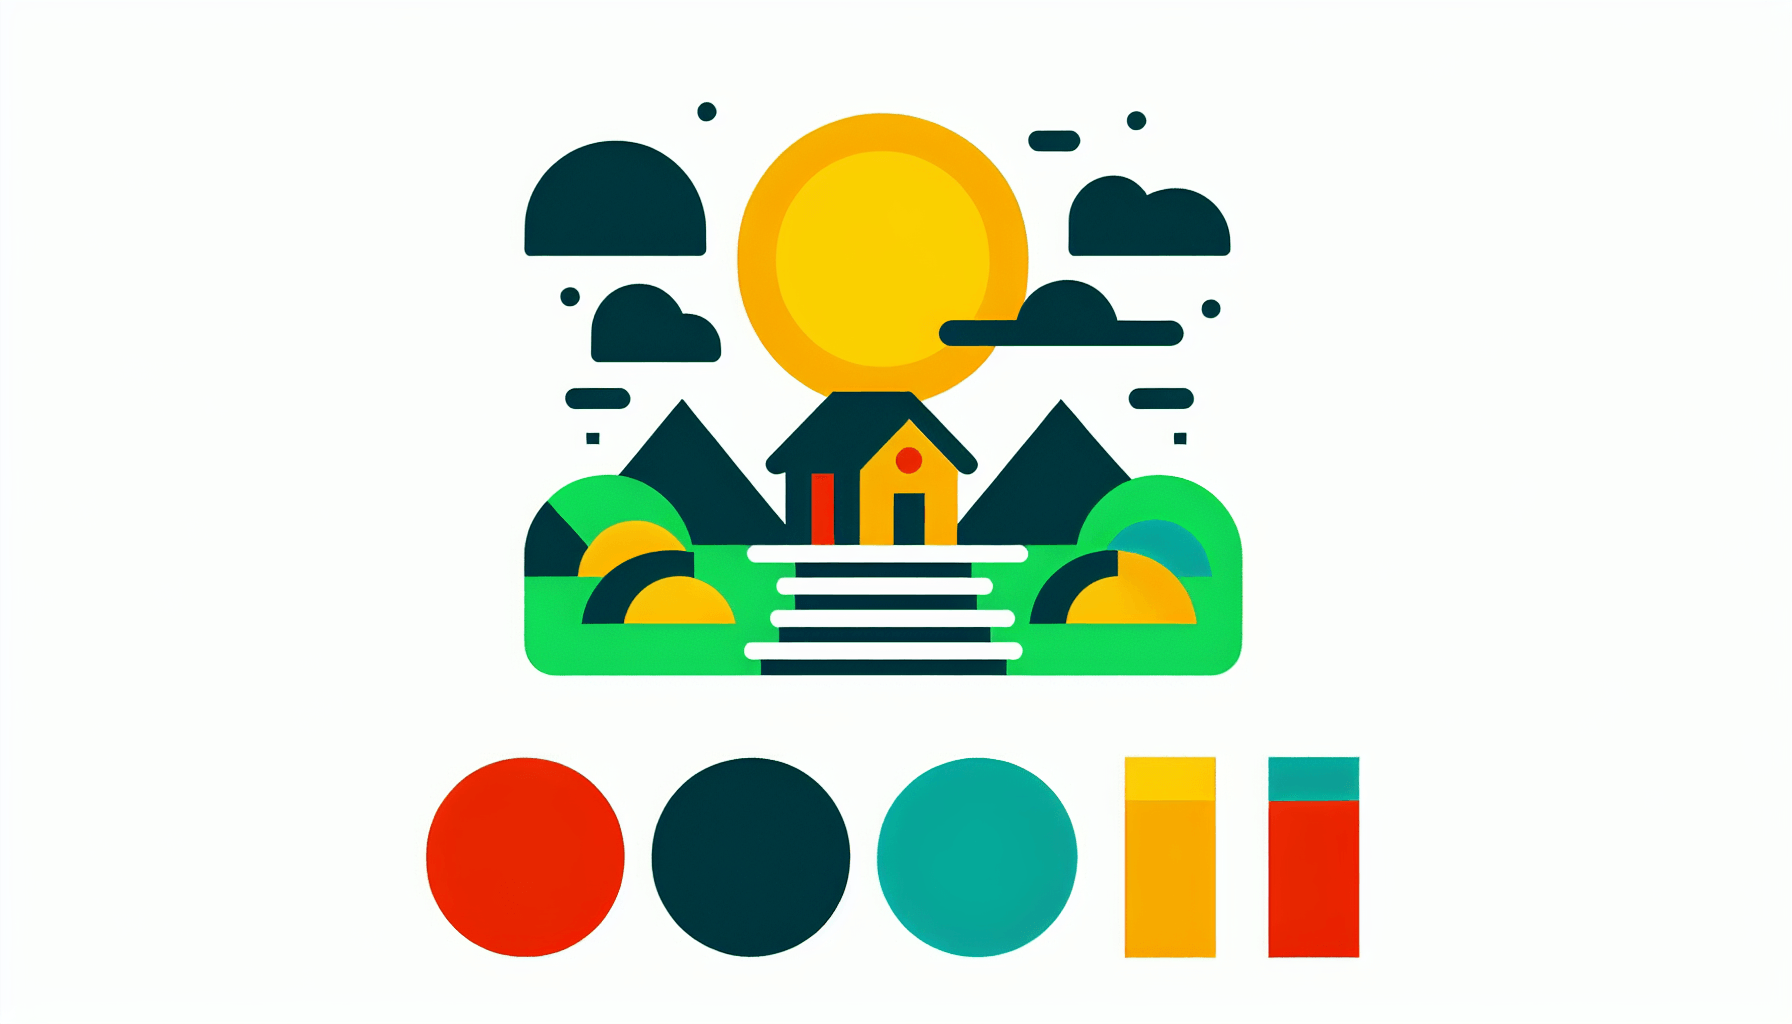 Differentiation in flat illustration style and white background, red #f47574, green #88c7a8, yellow #fcc44b, and blue #645bc8 colors.